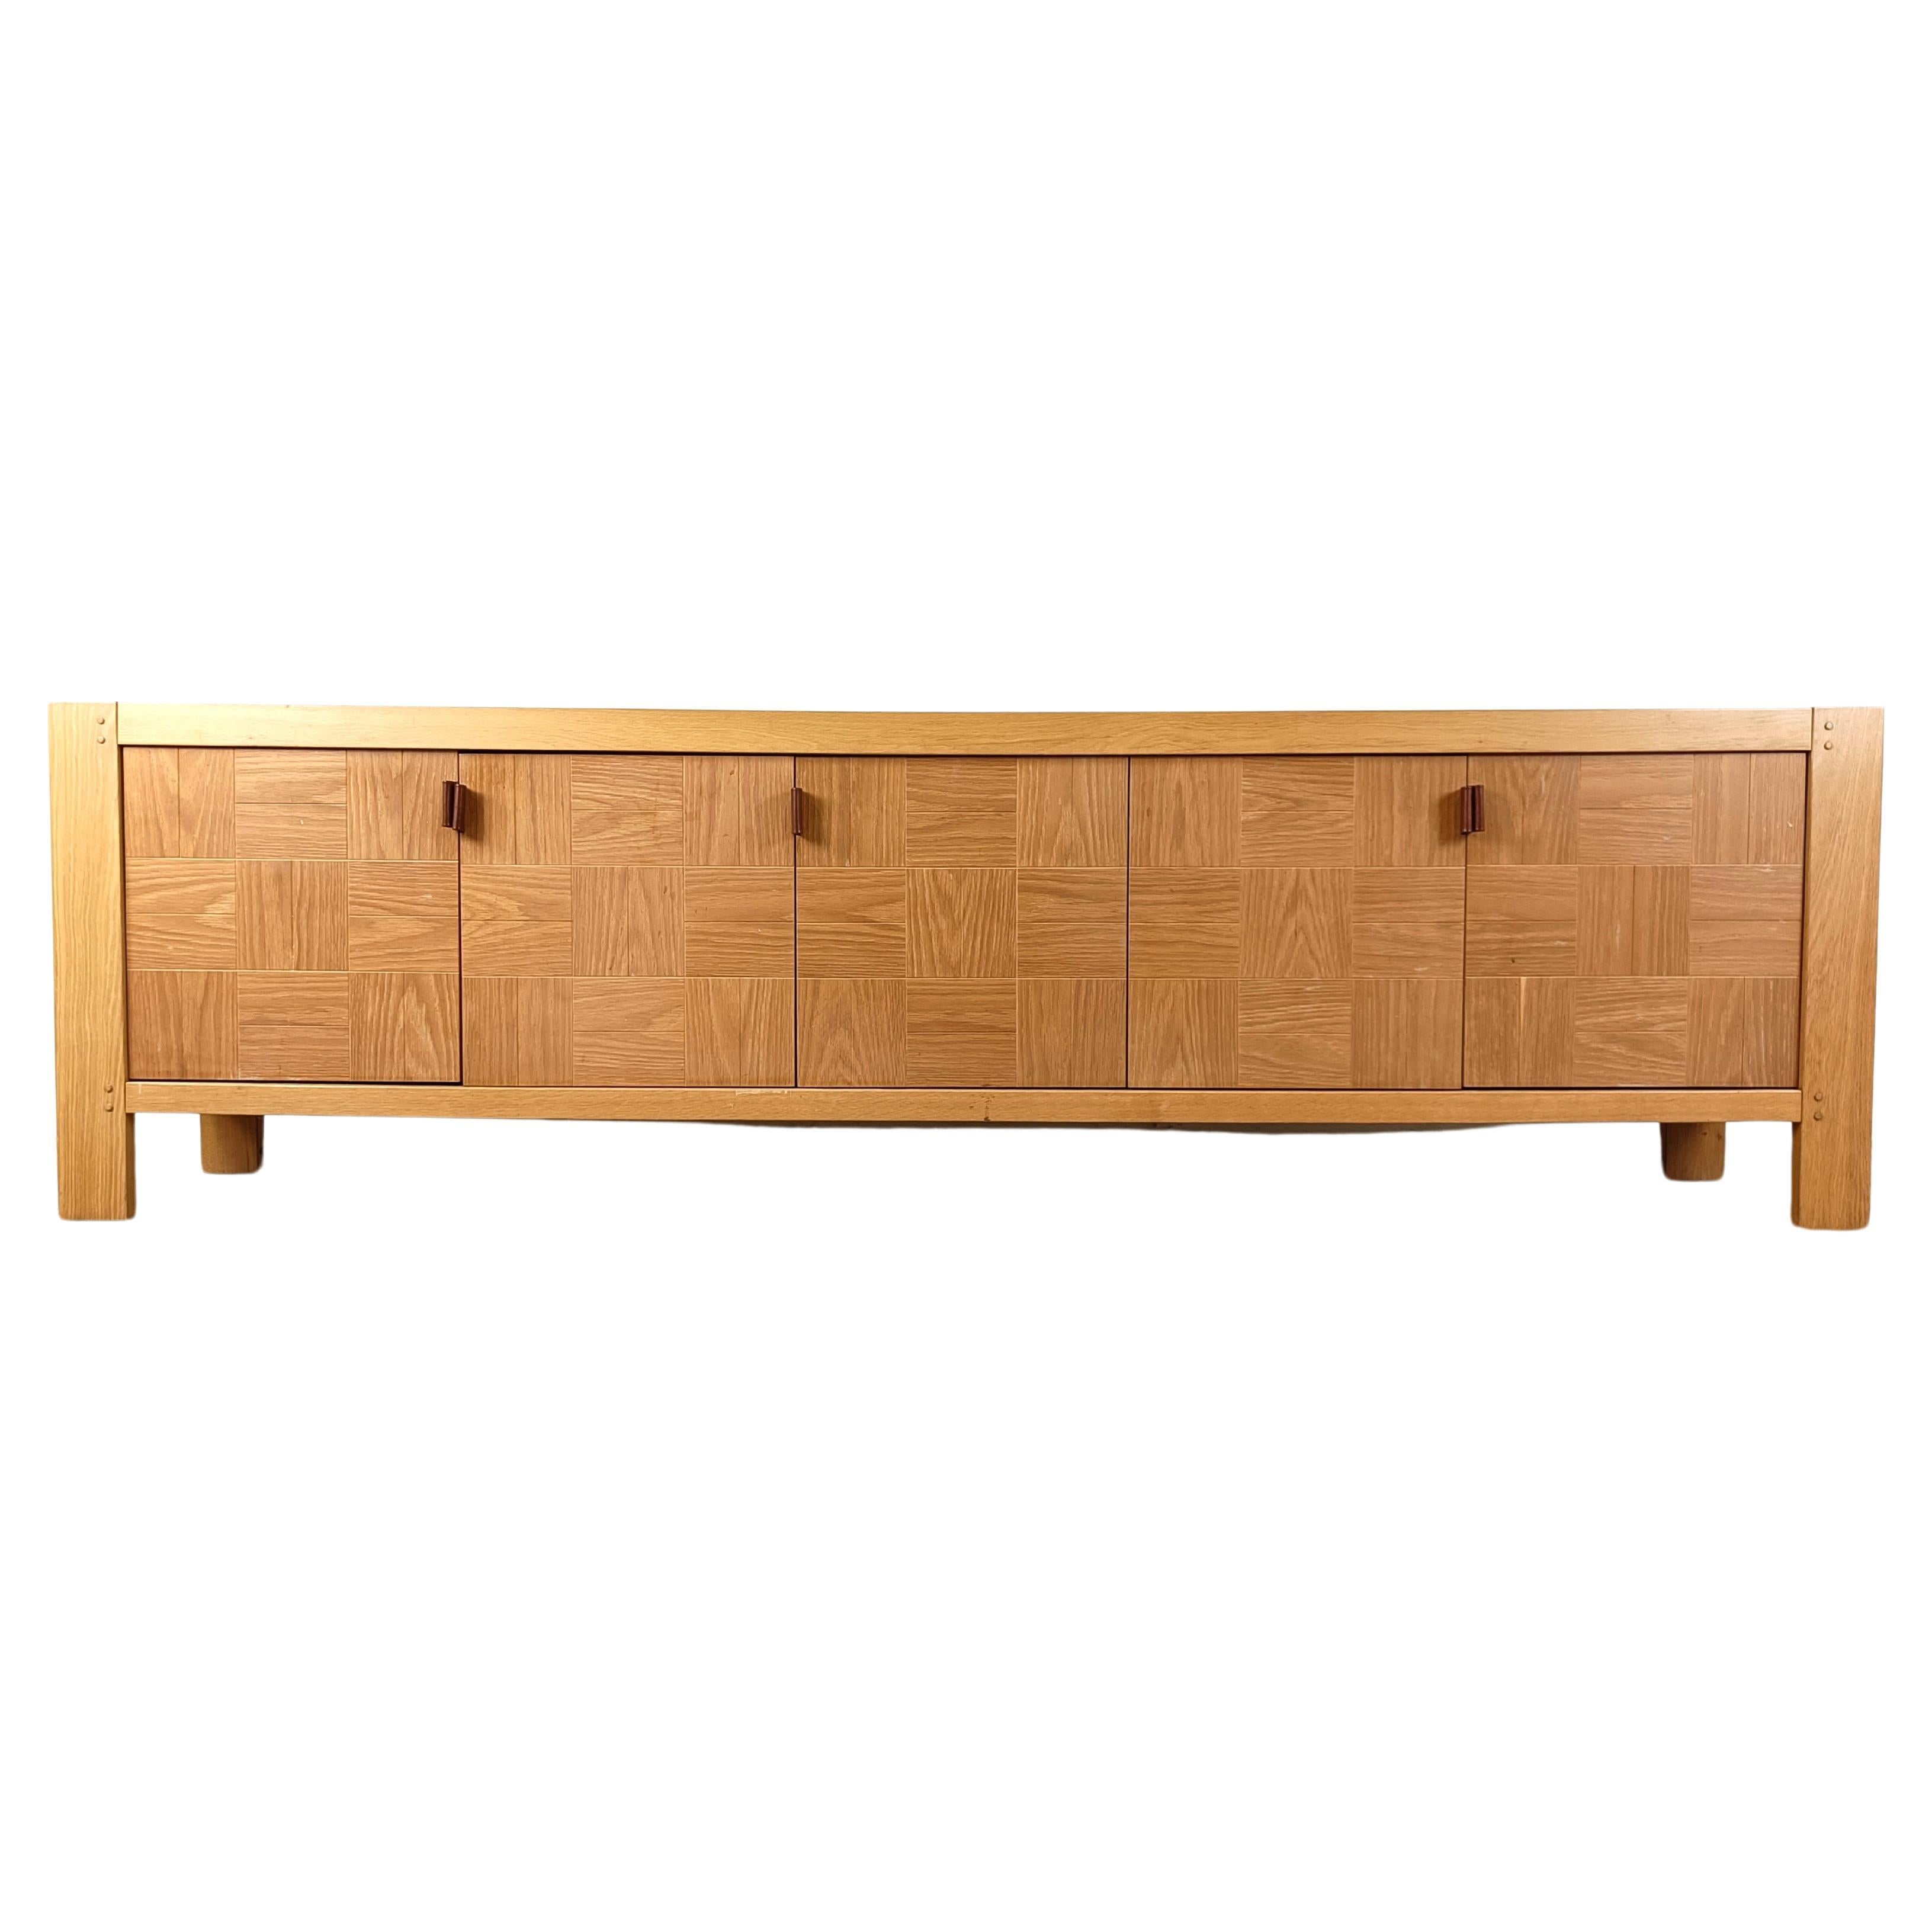 Vintage sideboard by Frans Defour for Defour, 1970s